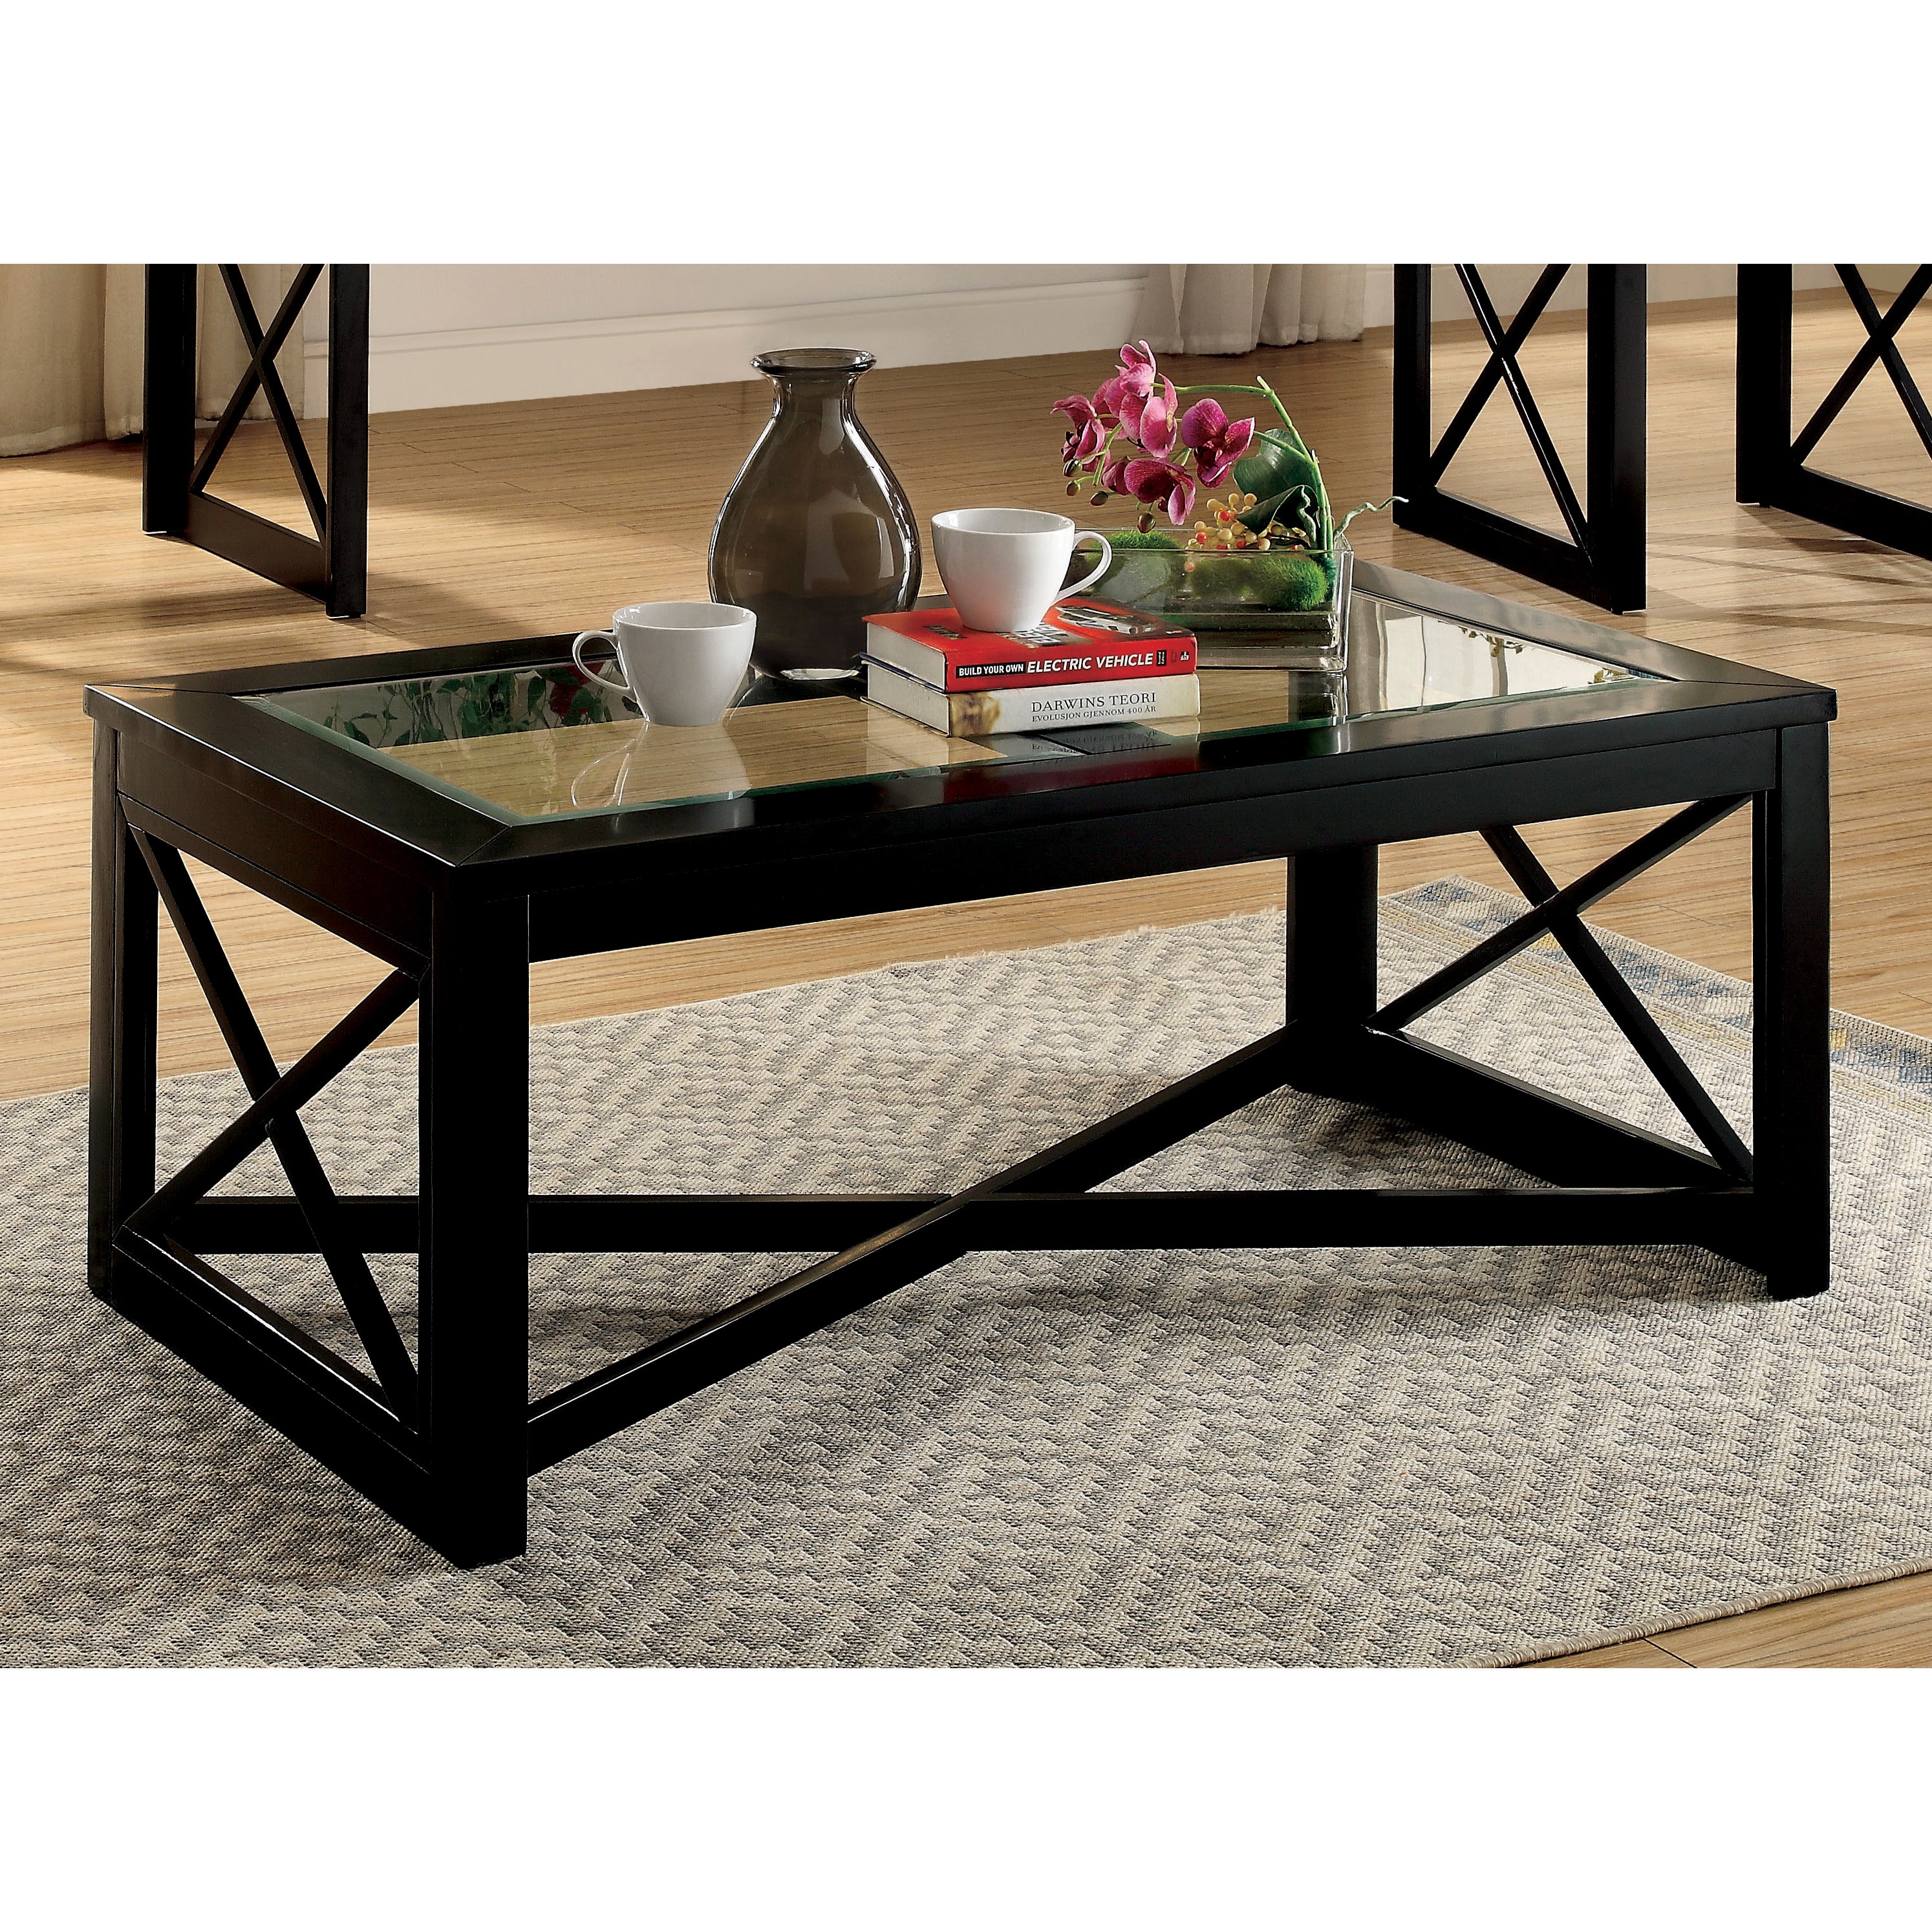 Furniture Of America Lai Contemporary Black Solid Wood Coffee Table On Sale Overstock 15174548